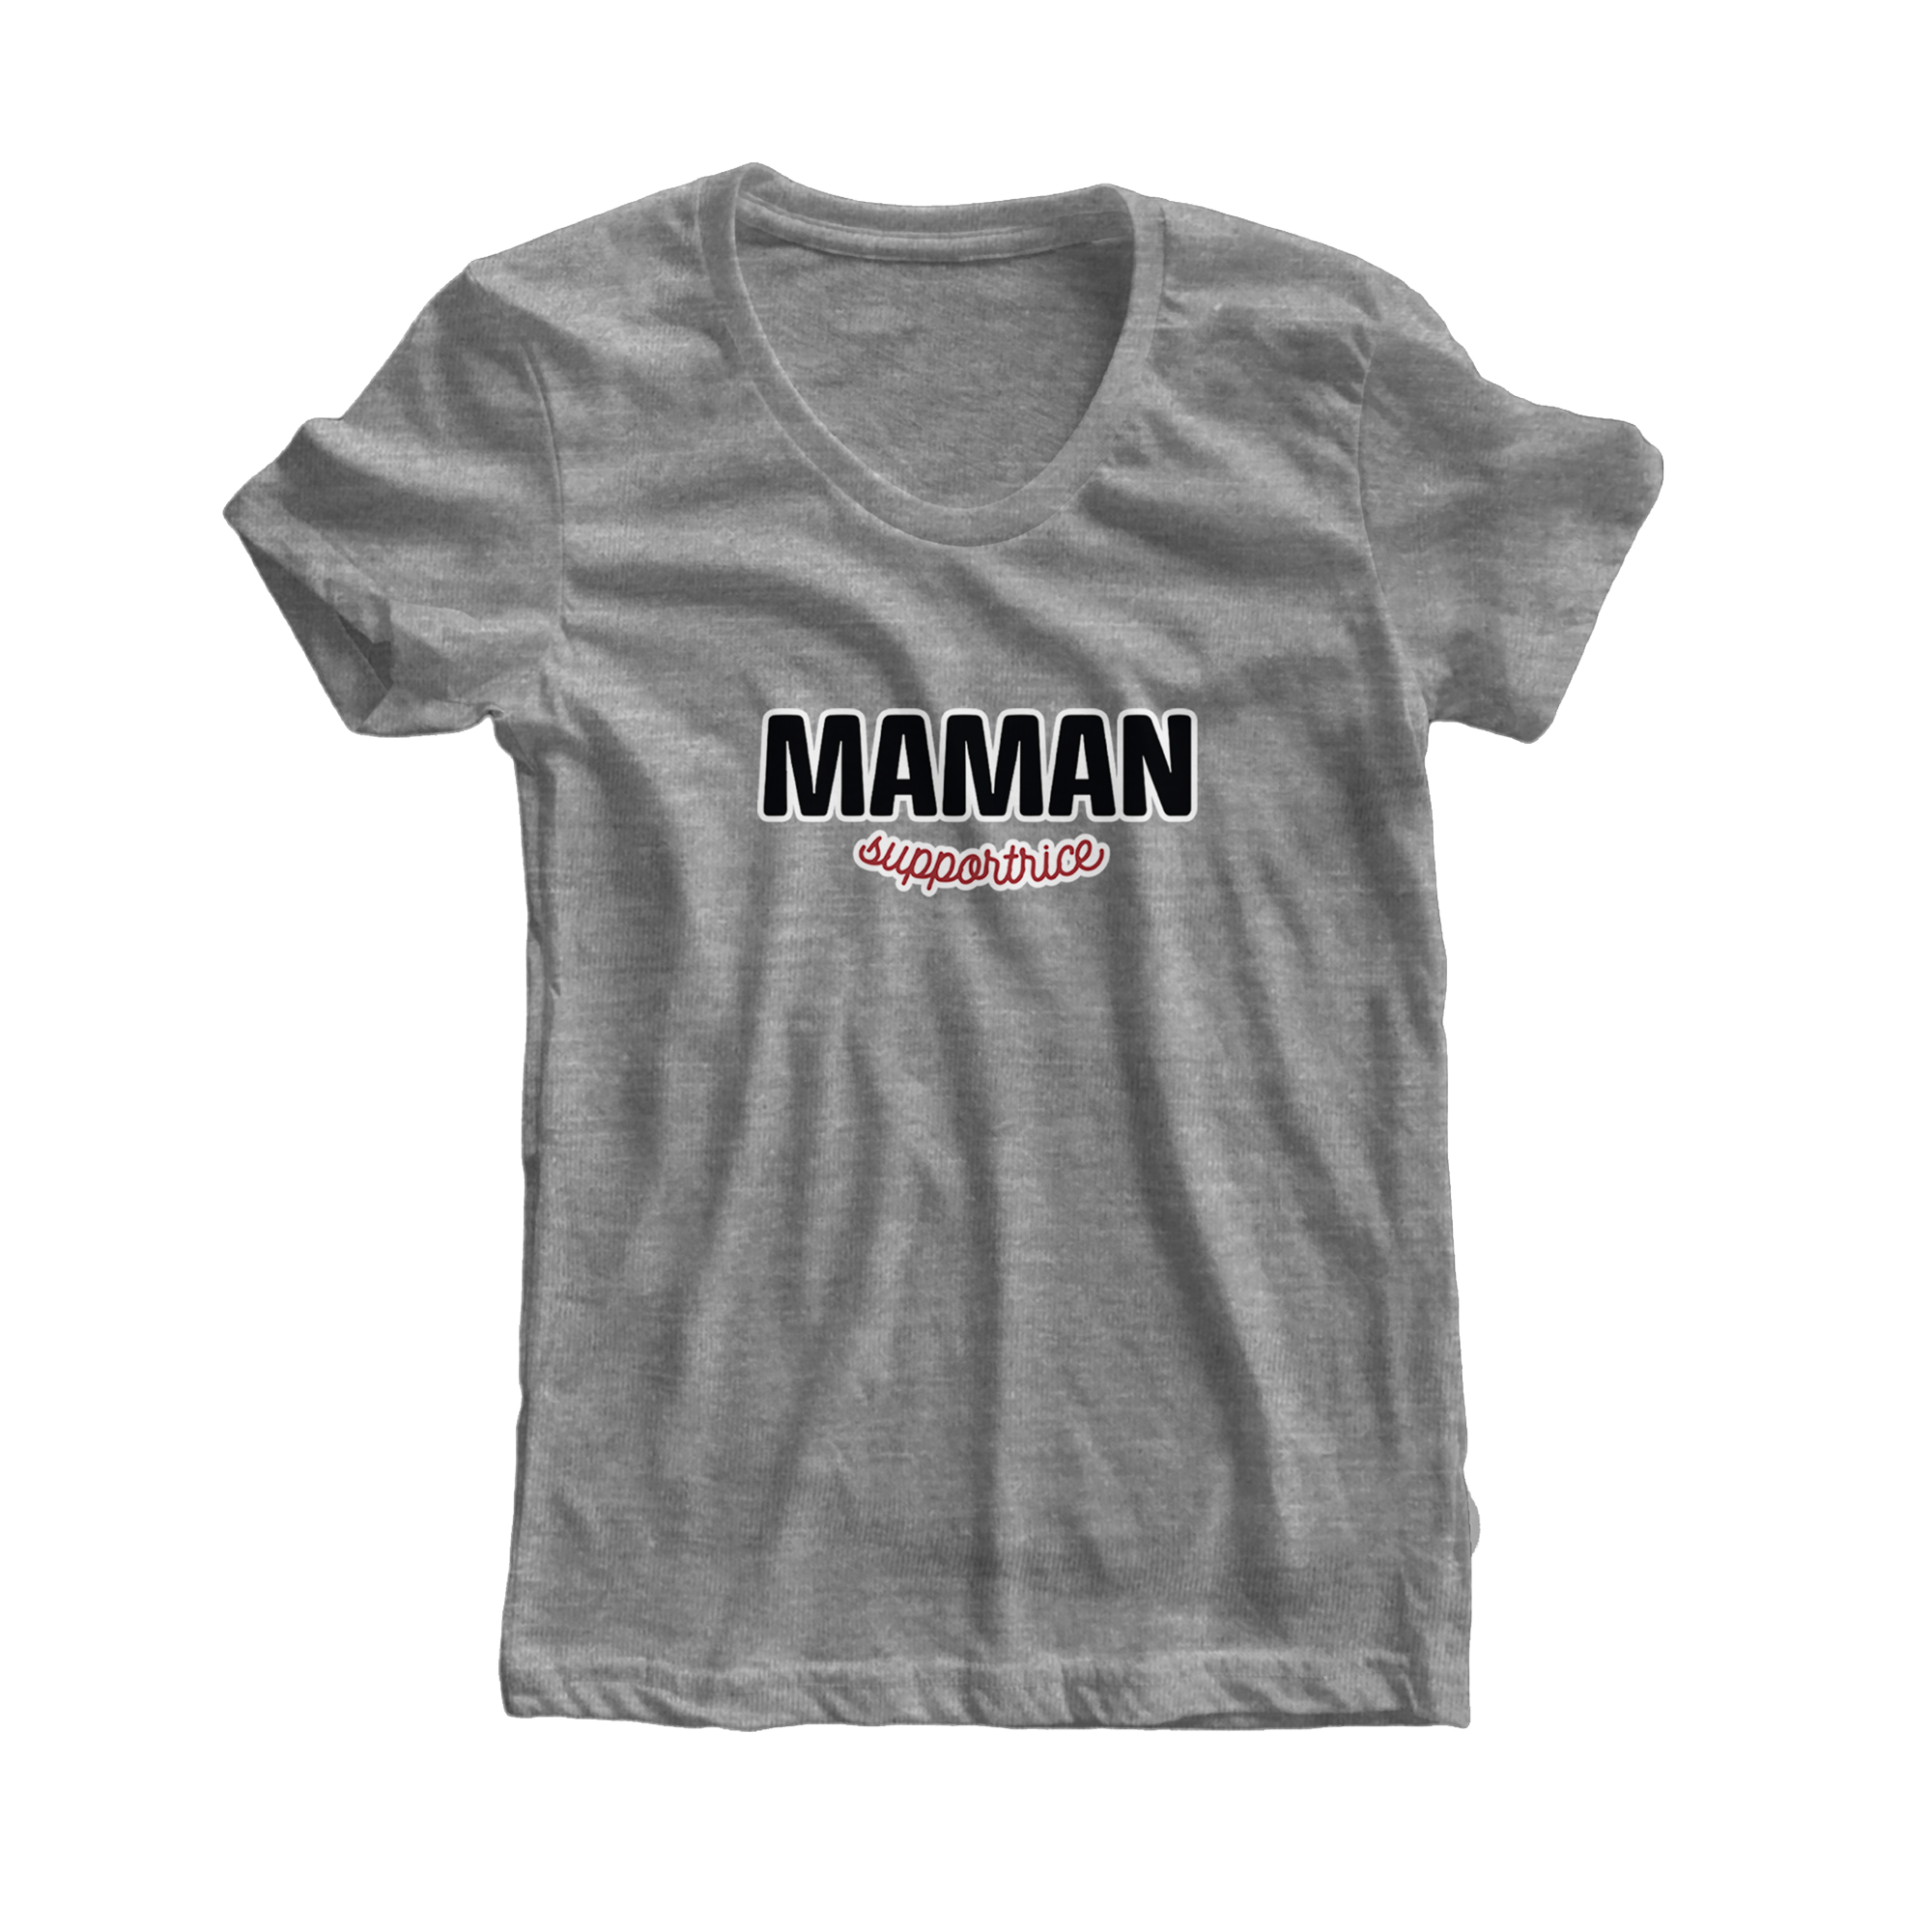 MAMAN supportrice - T-SHIRT (Femme)